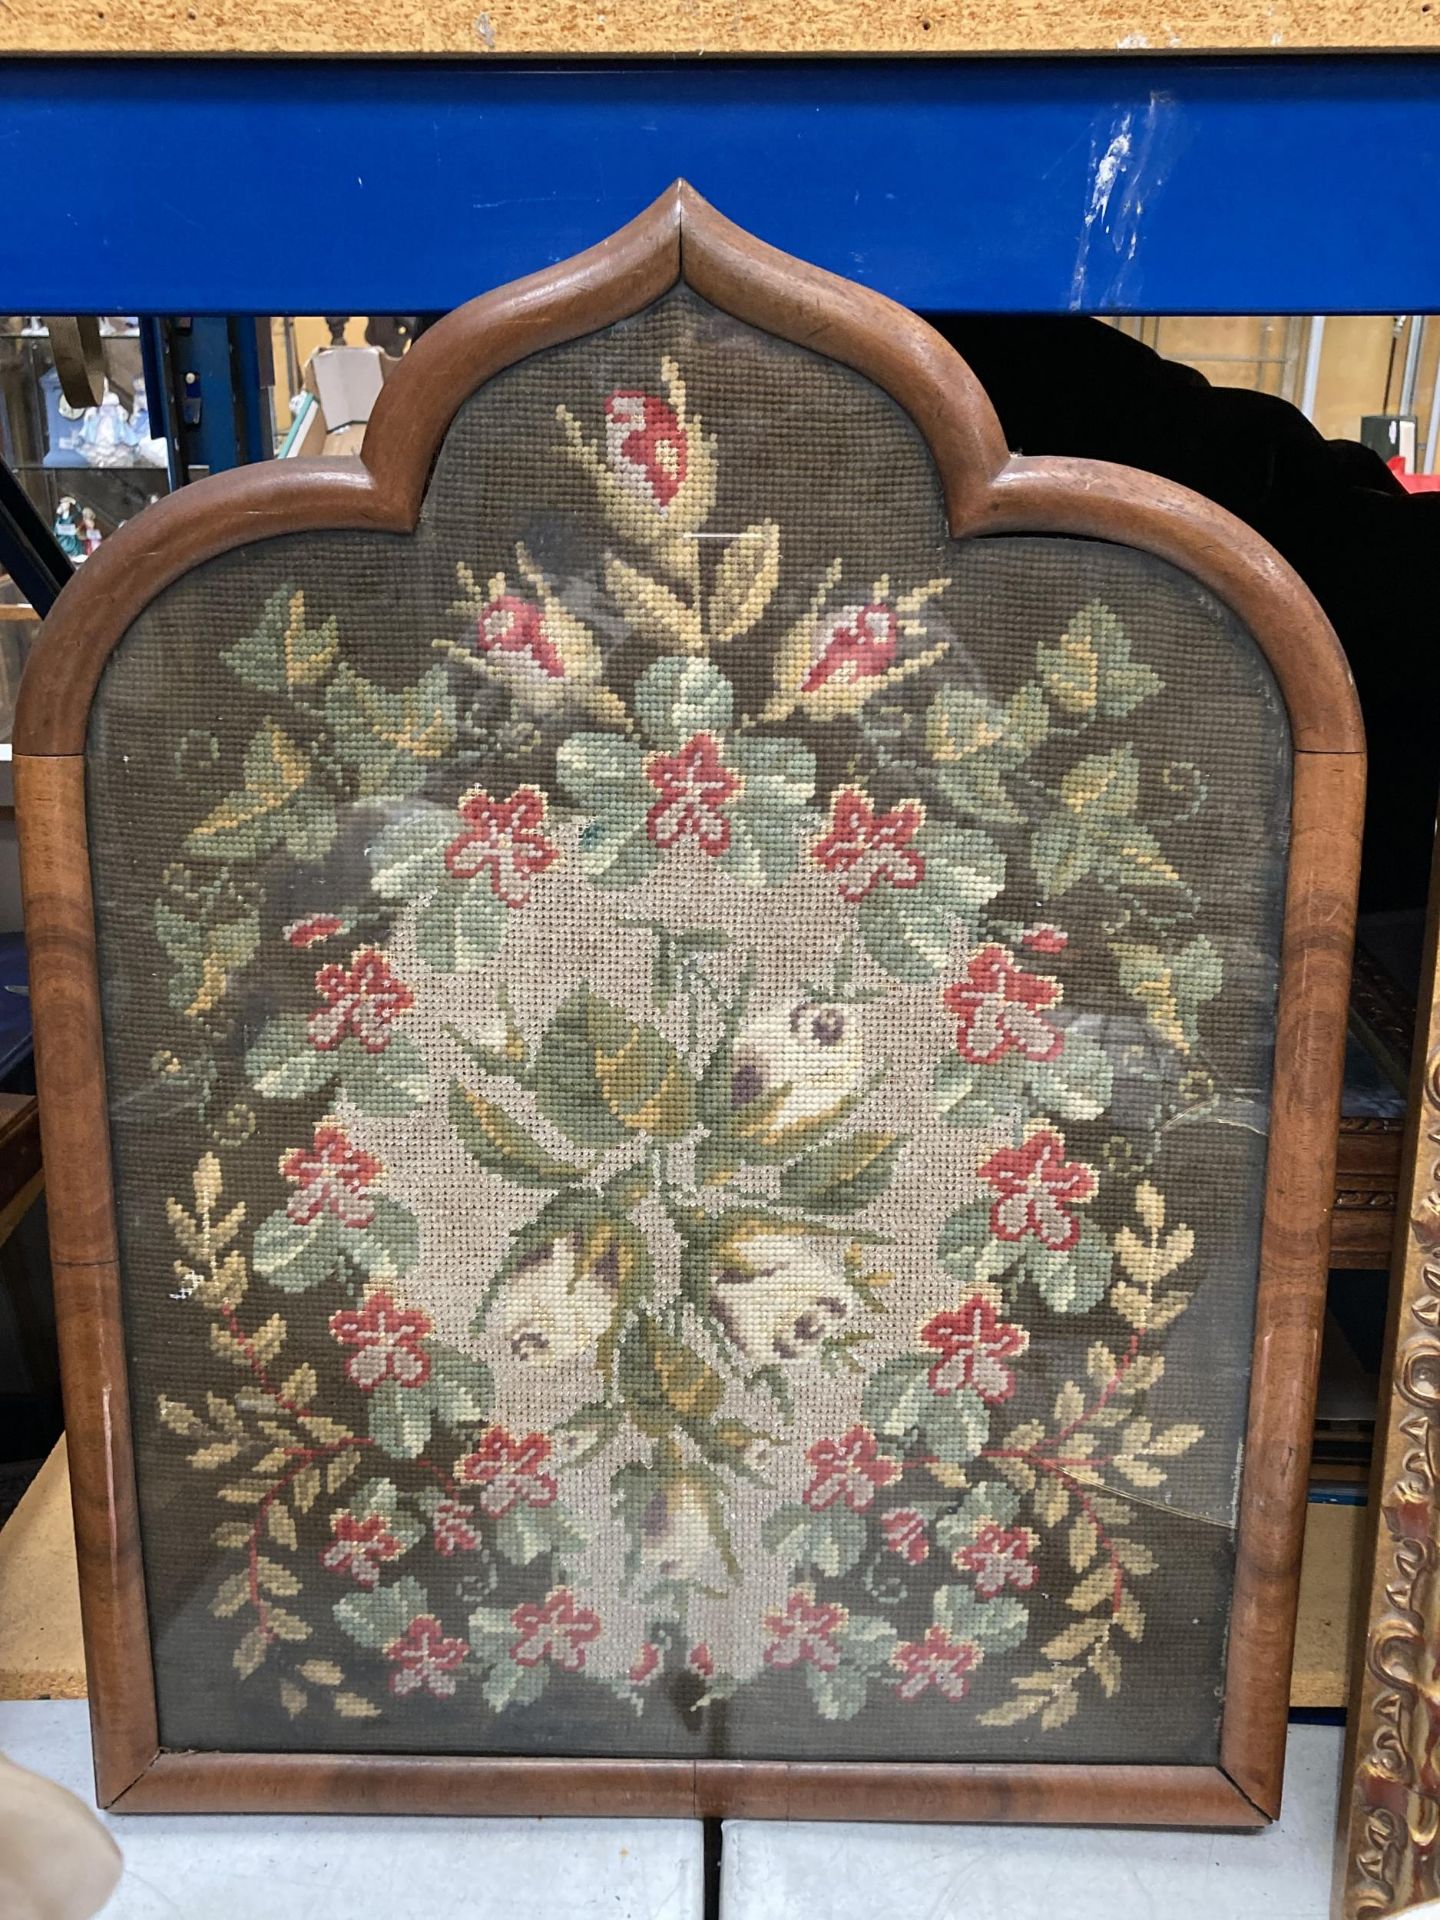 A MID 19TH CENTURY NEEDLEWORK OF FLOWERS, 56CM X 43CM, FRAMED AND GLAZED